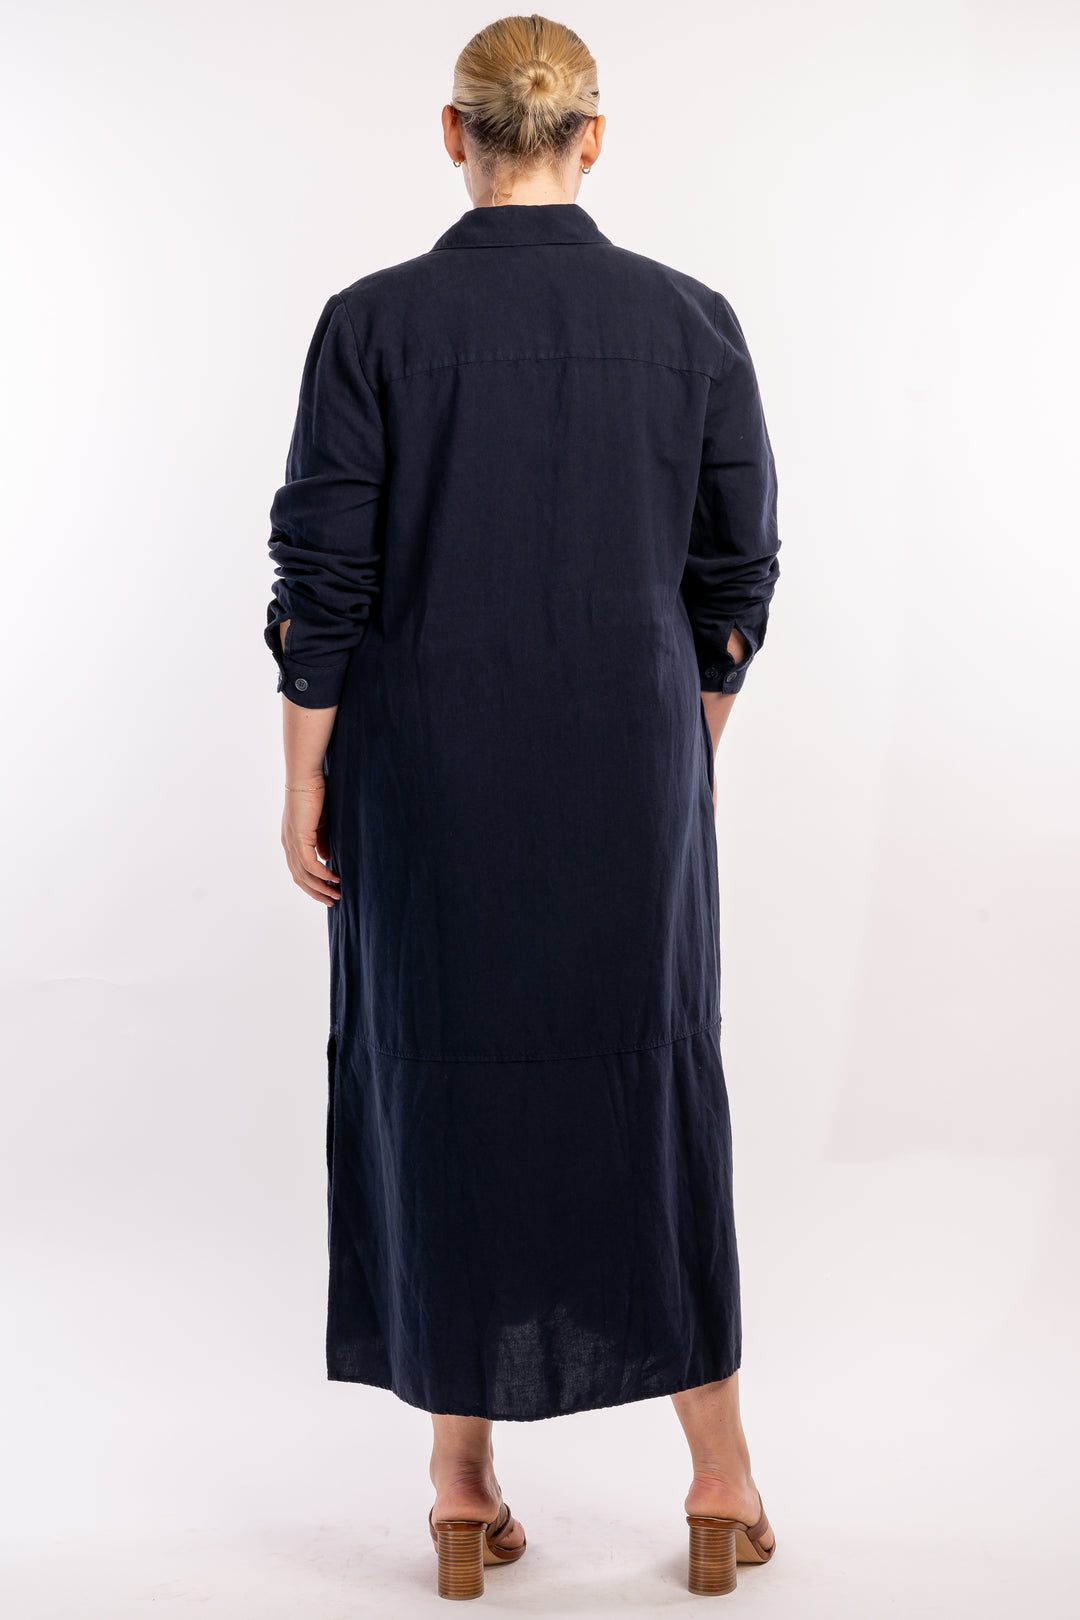 Sweet Dreams Linen Maxi Dress - Navy - Only available in XS & M